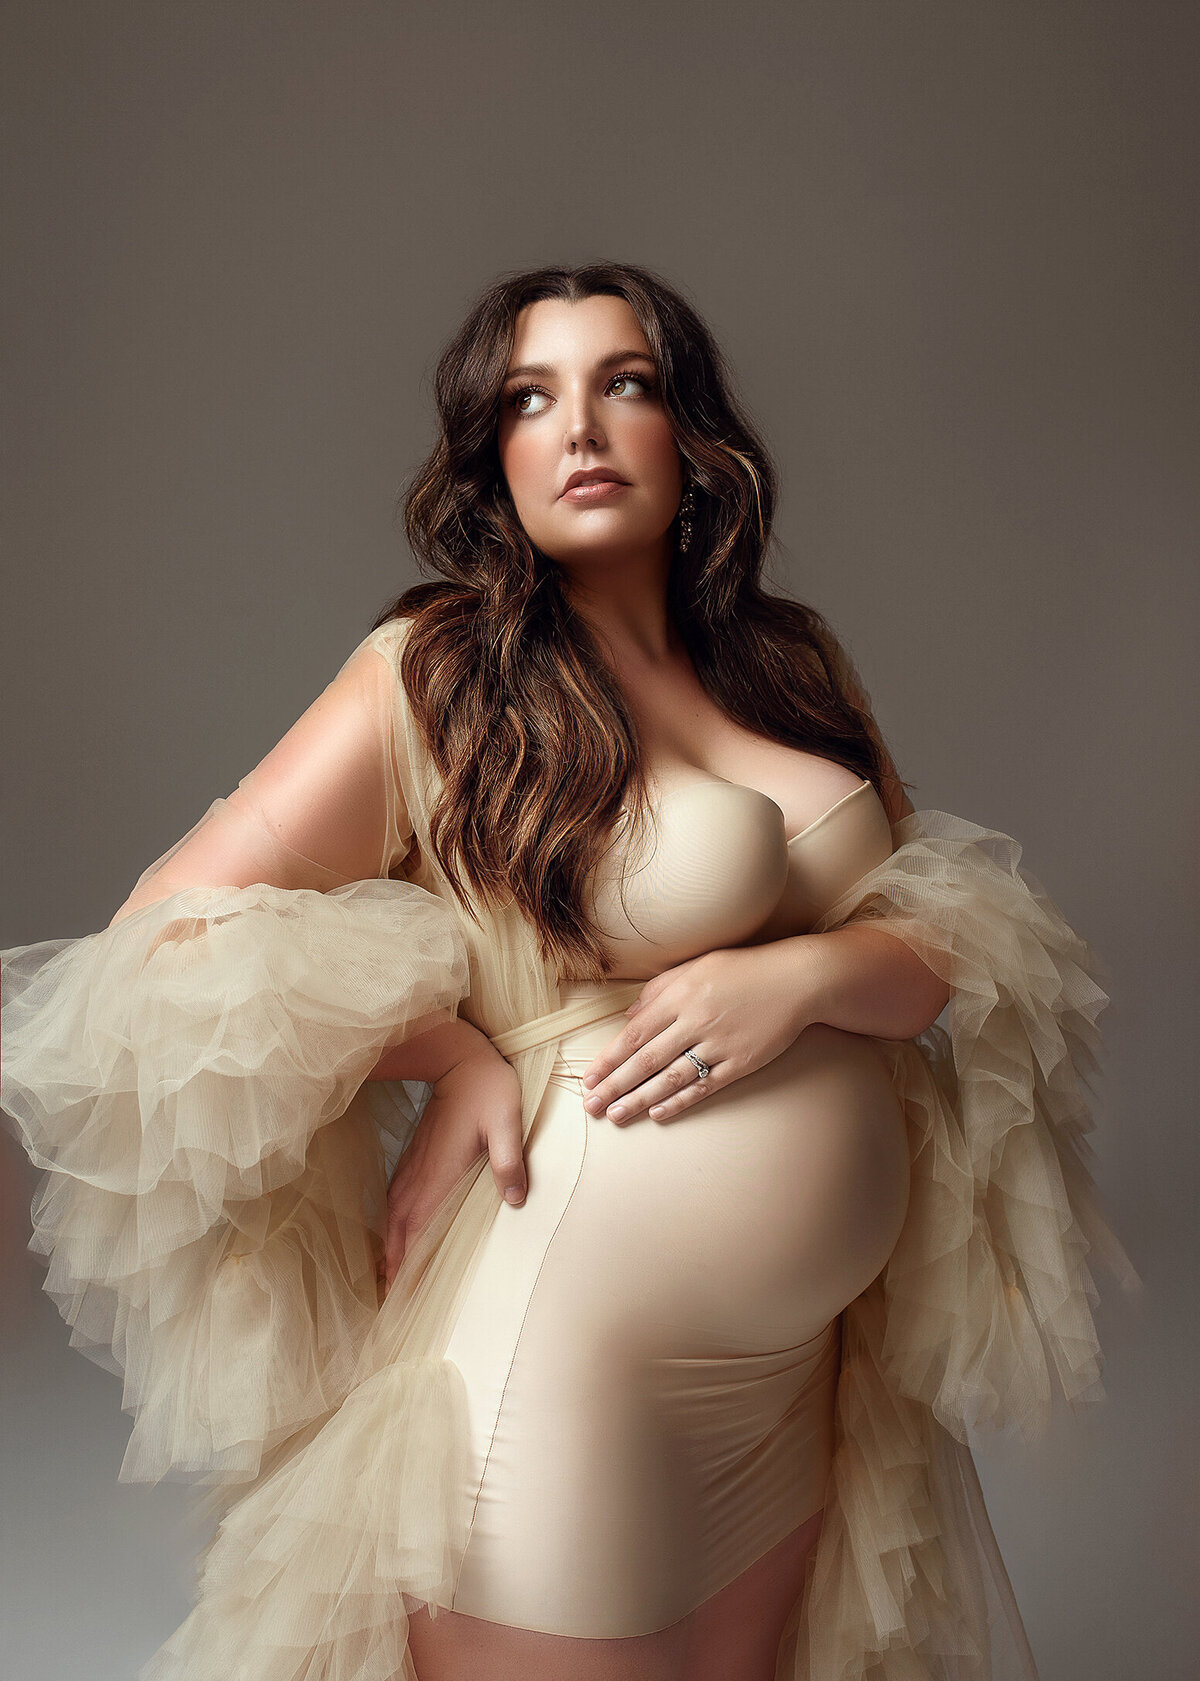 Luxury maternity portrait with Alexis having her first baby wearing nude